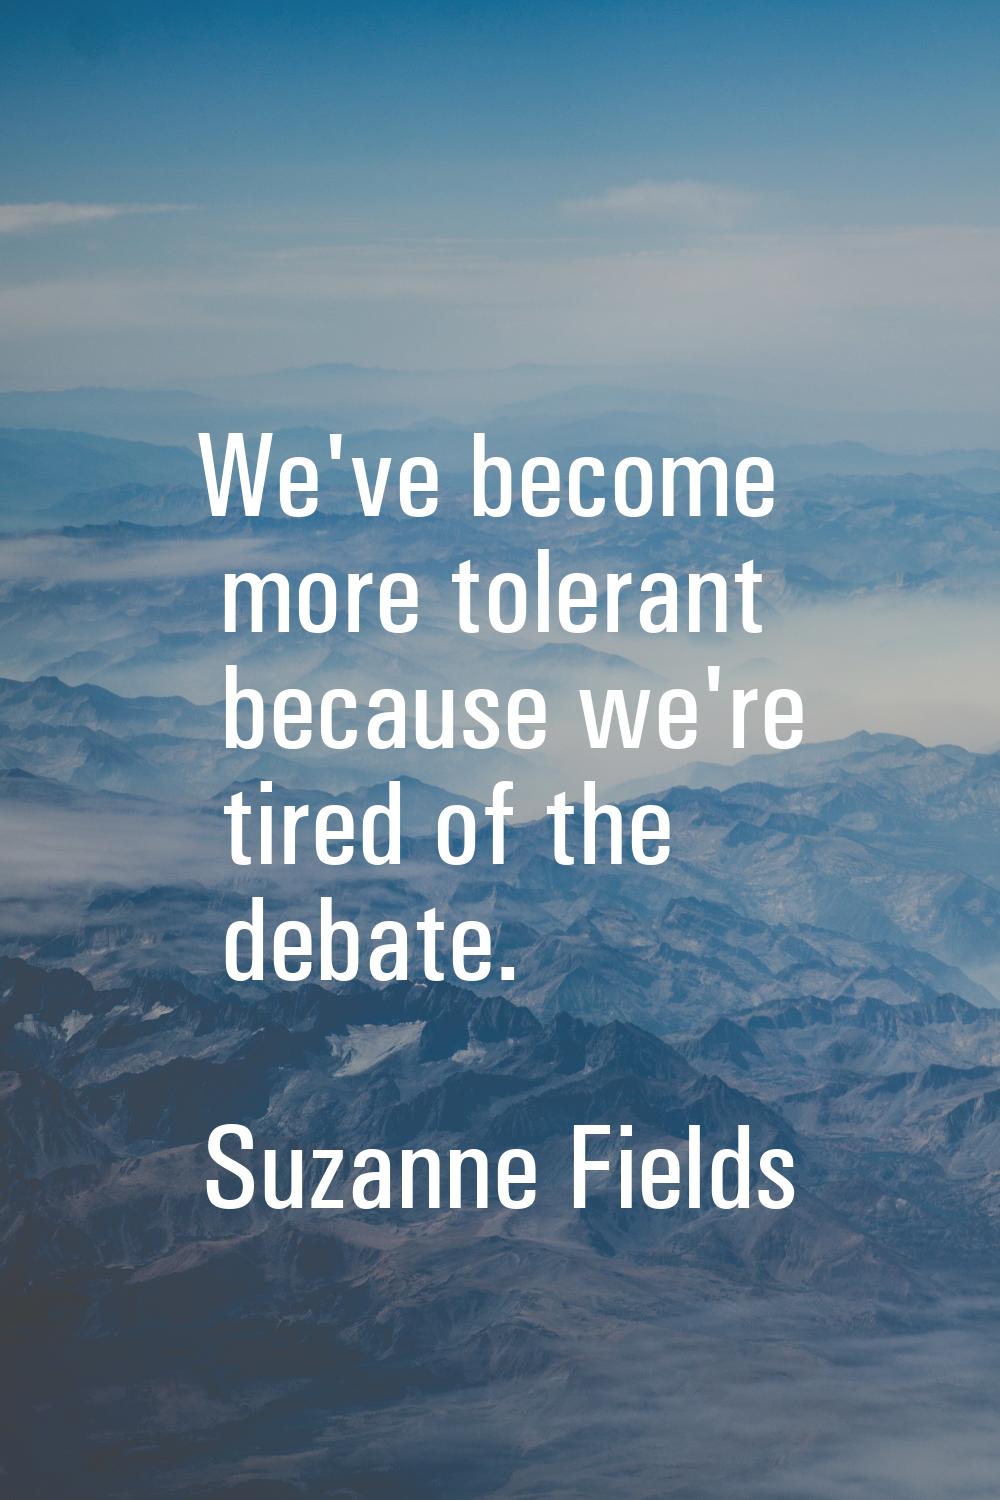 We've become more tolerant because we're tired of the debate.